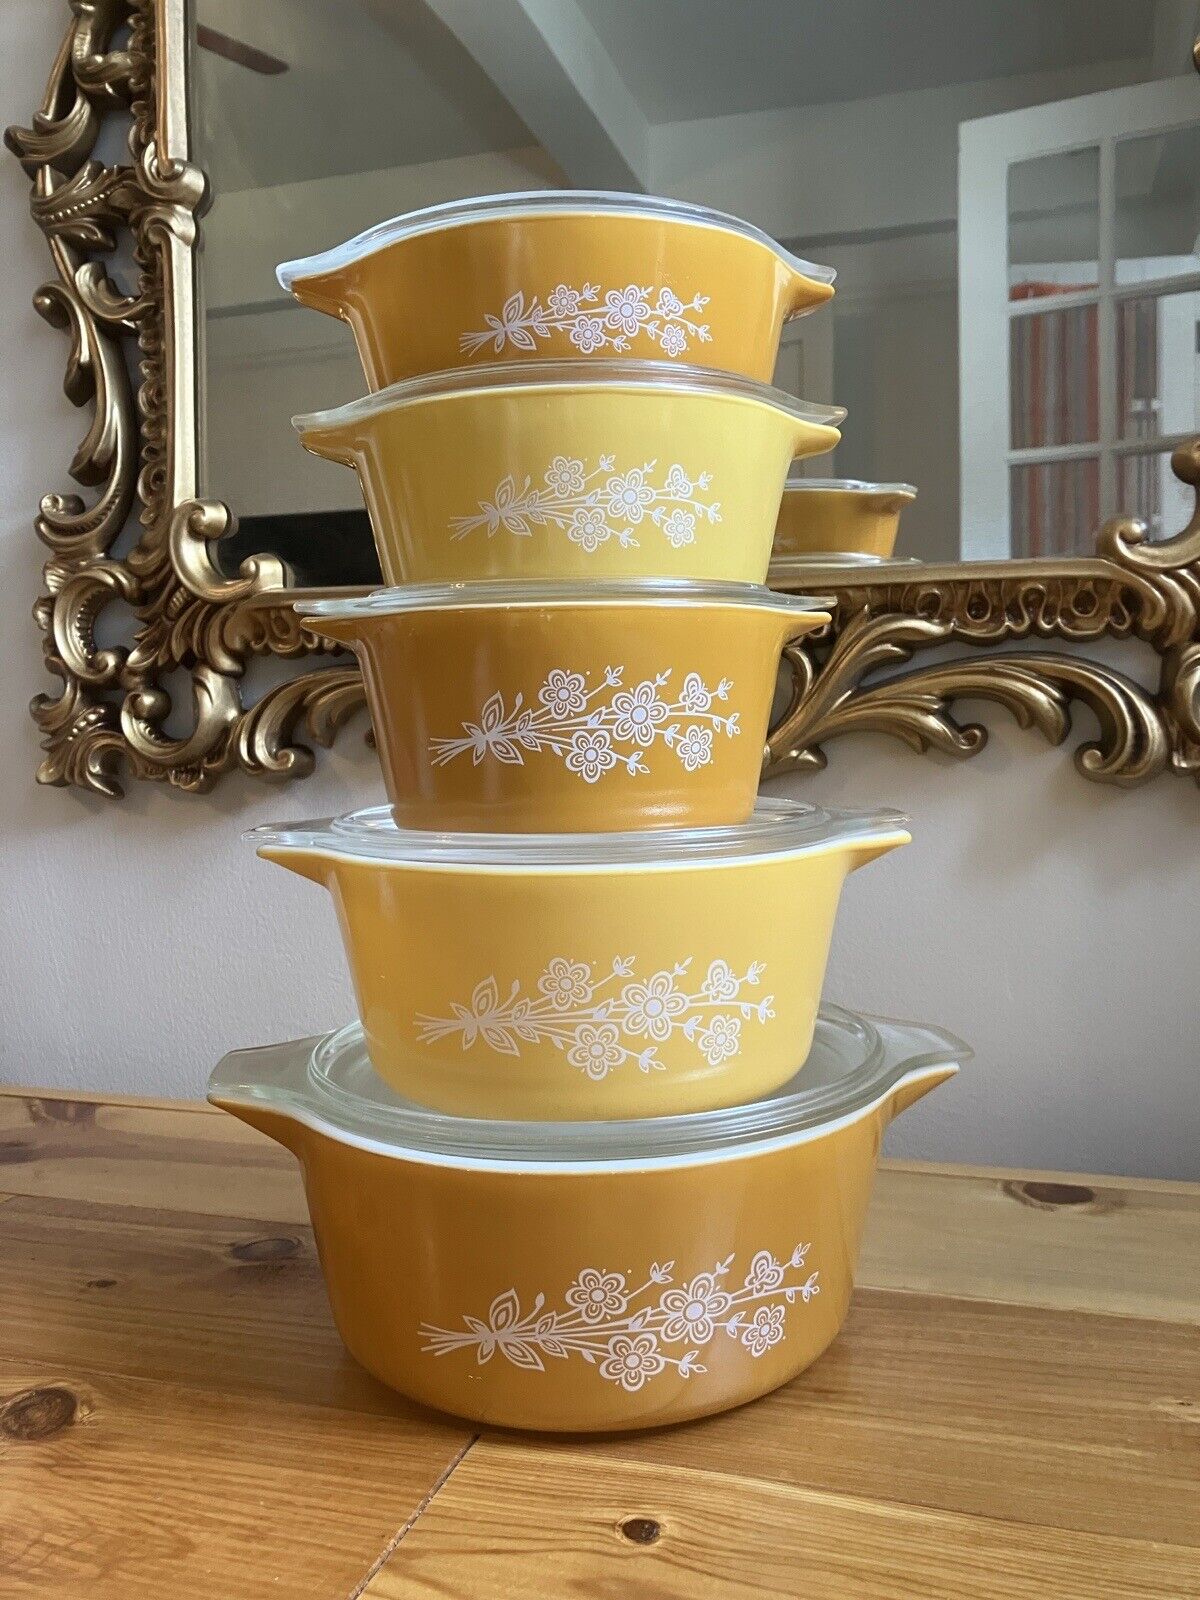 Pyrex Vintage Butterfly Gold Redesign Casserole Dish Full Set With Lids